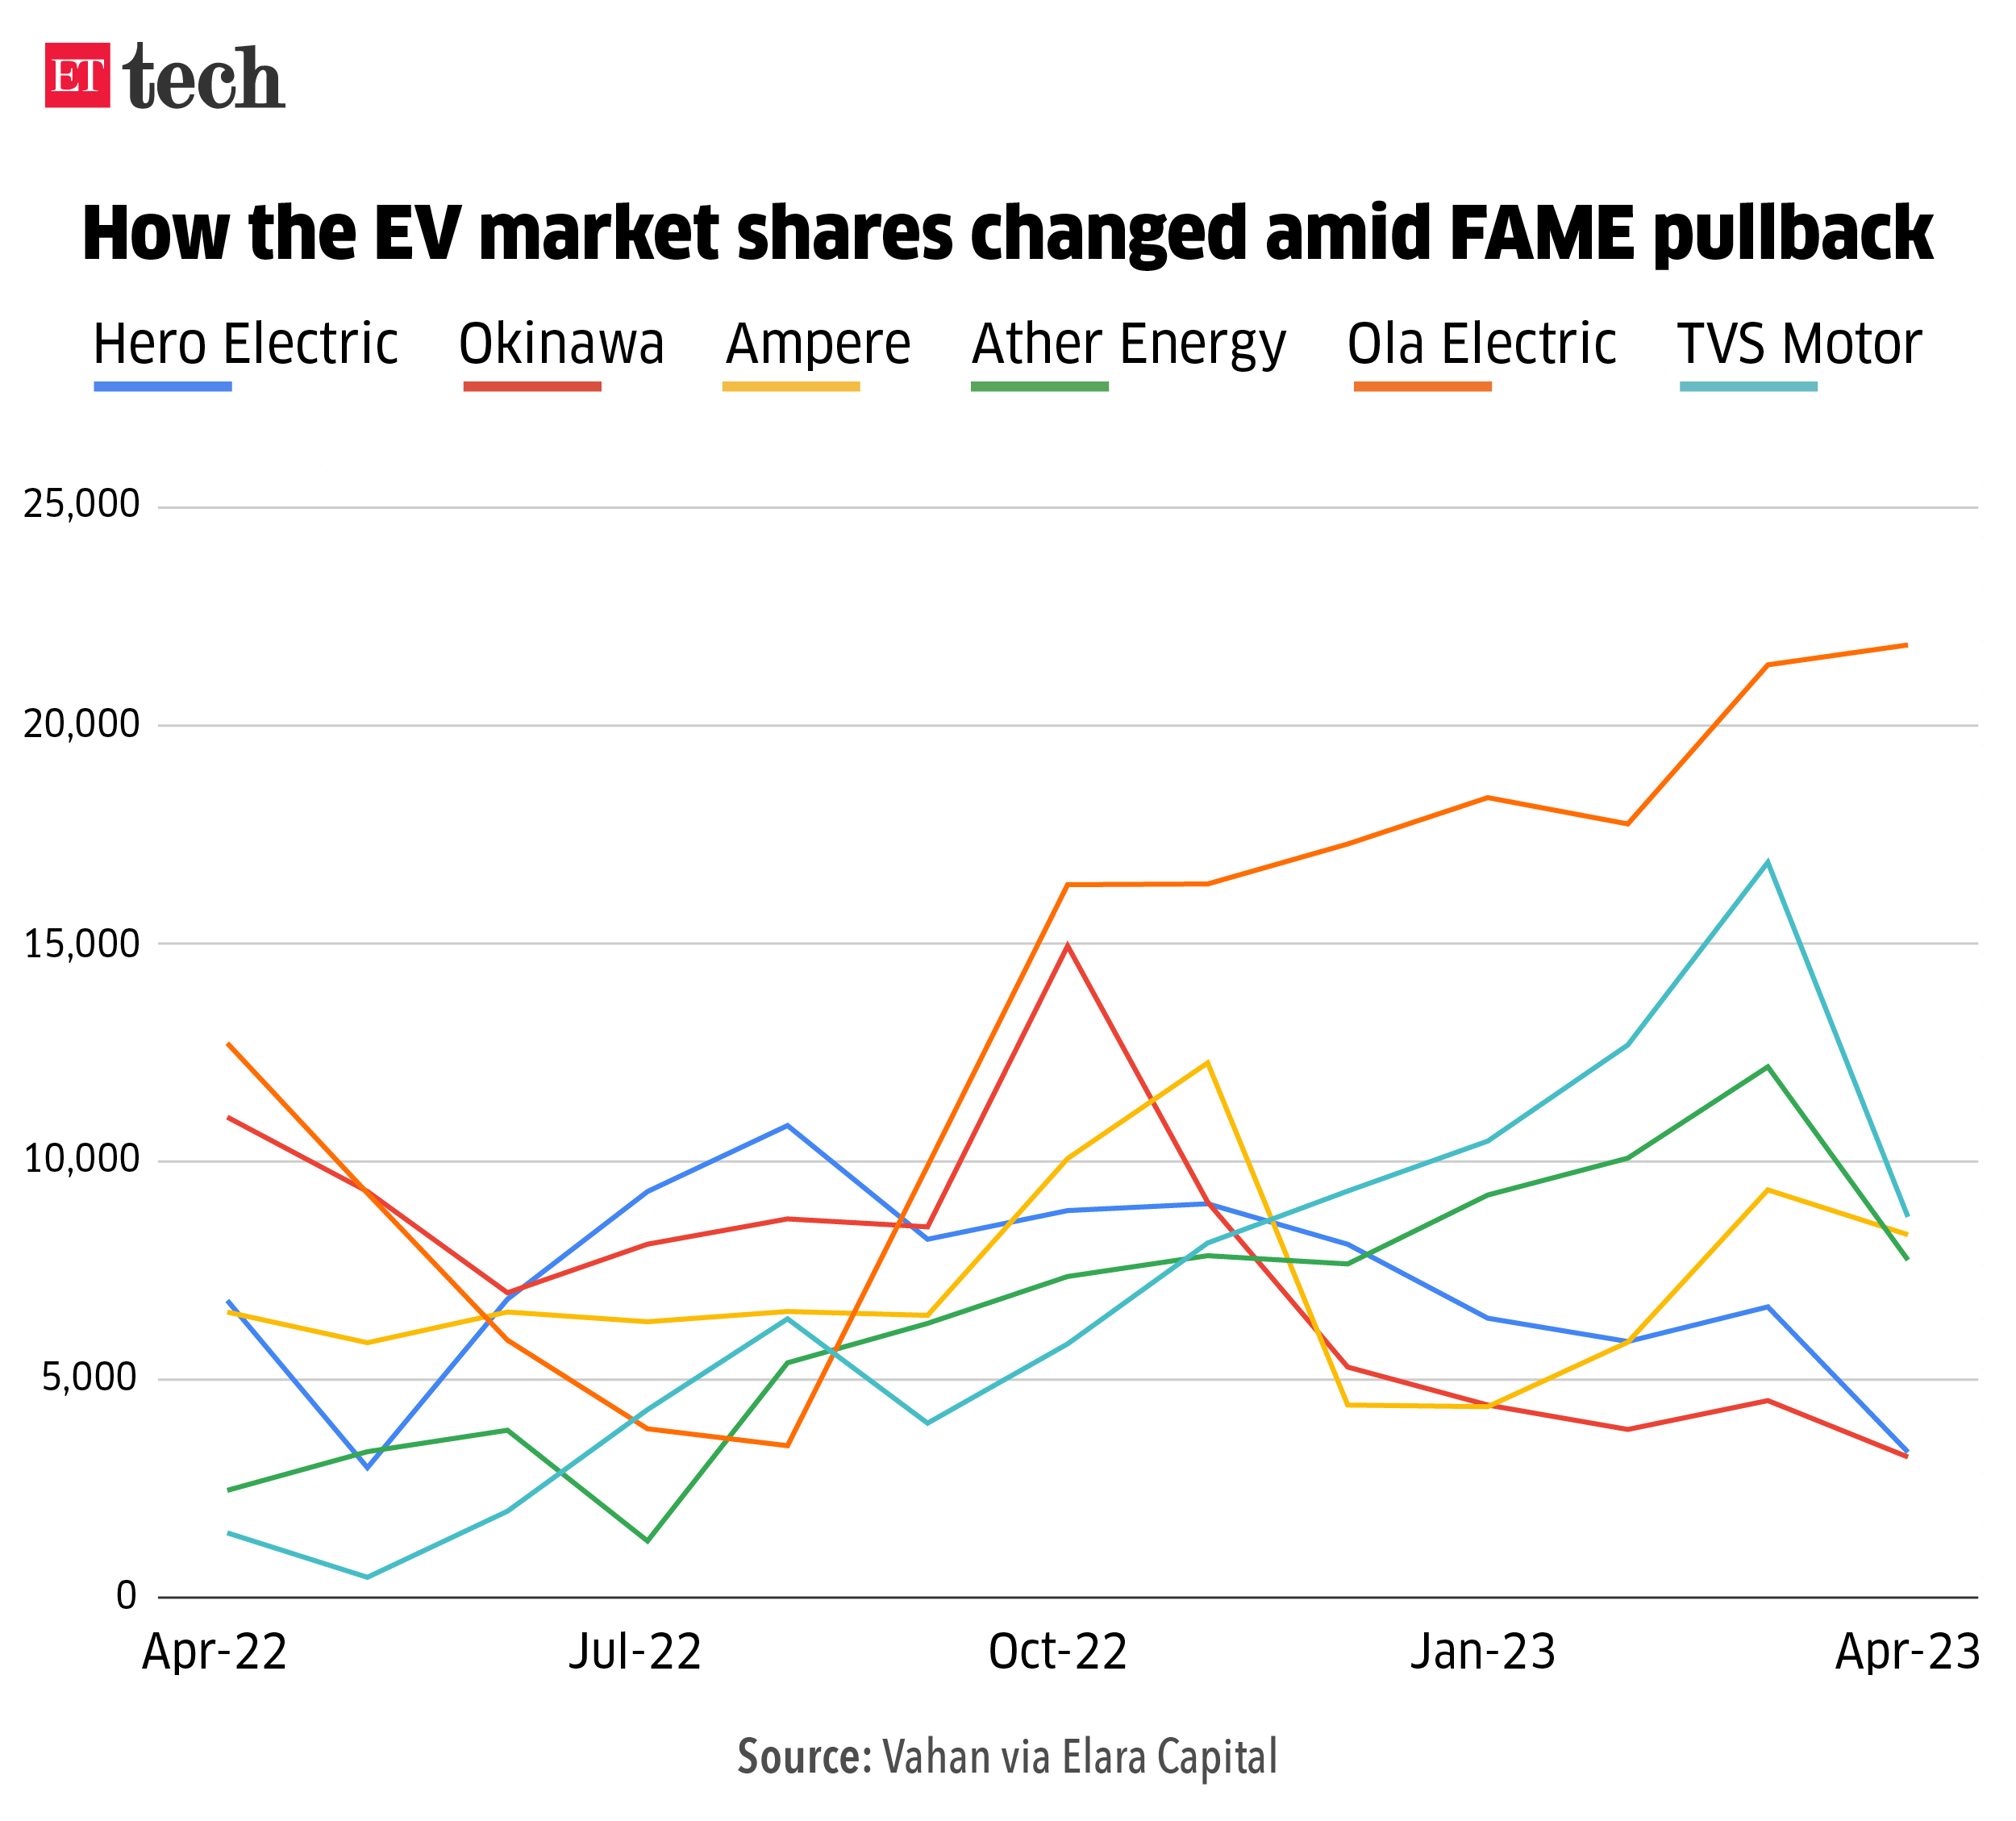 How the EV market shares changed amid FAME pullback